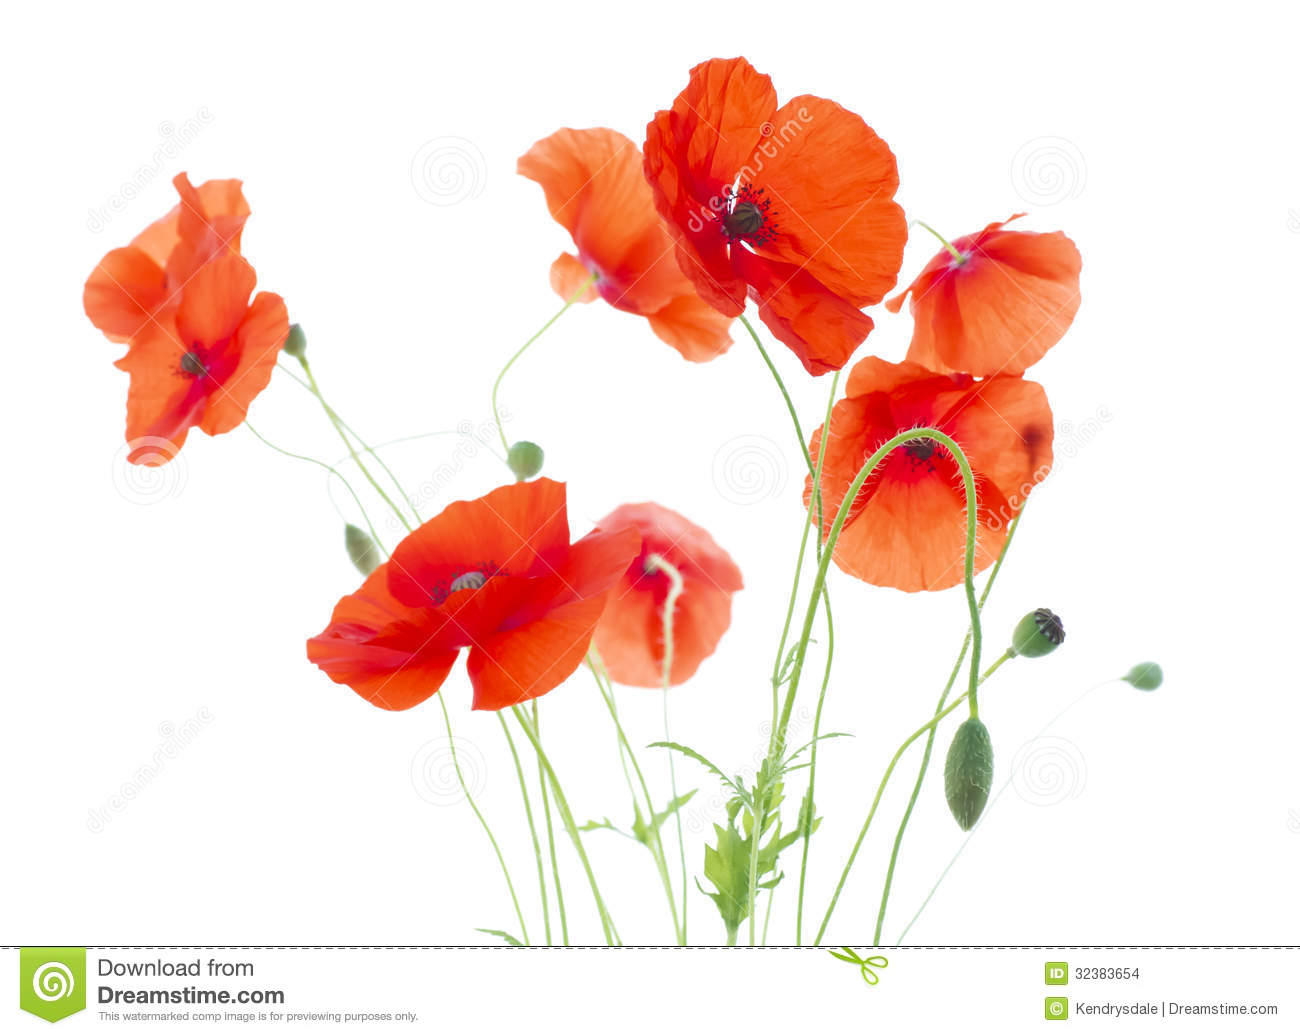 Poppies Clipart Corn With Seed Pods